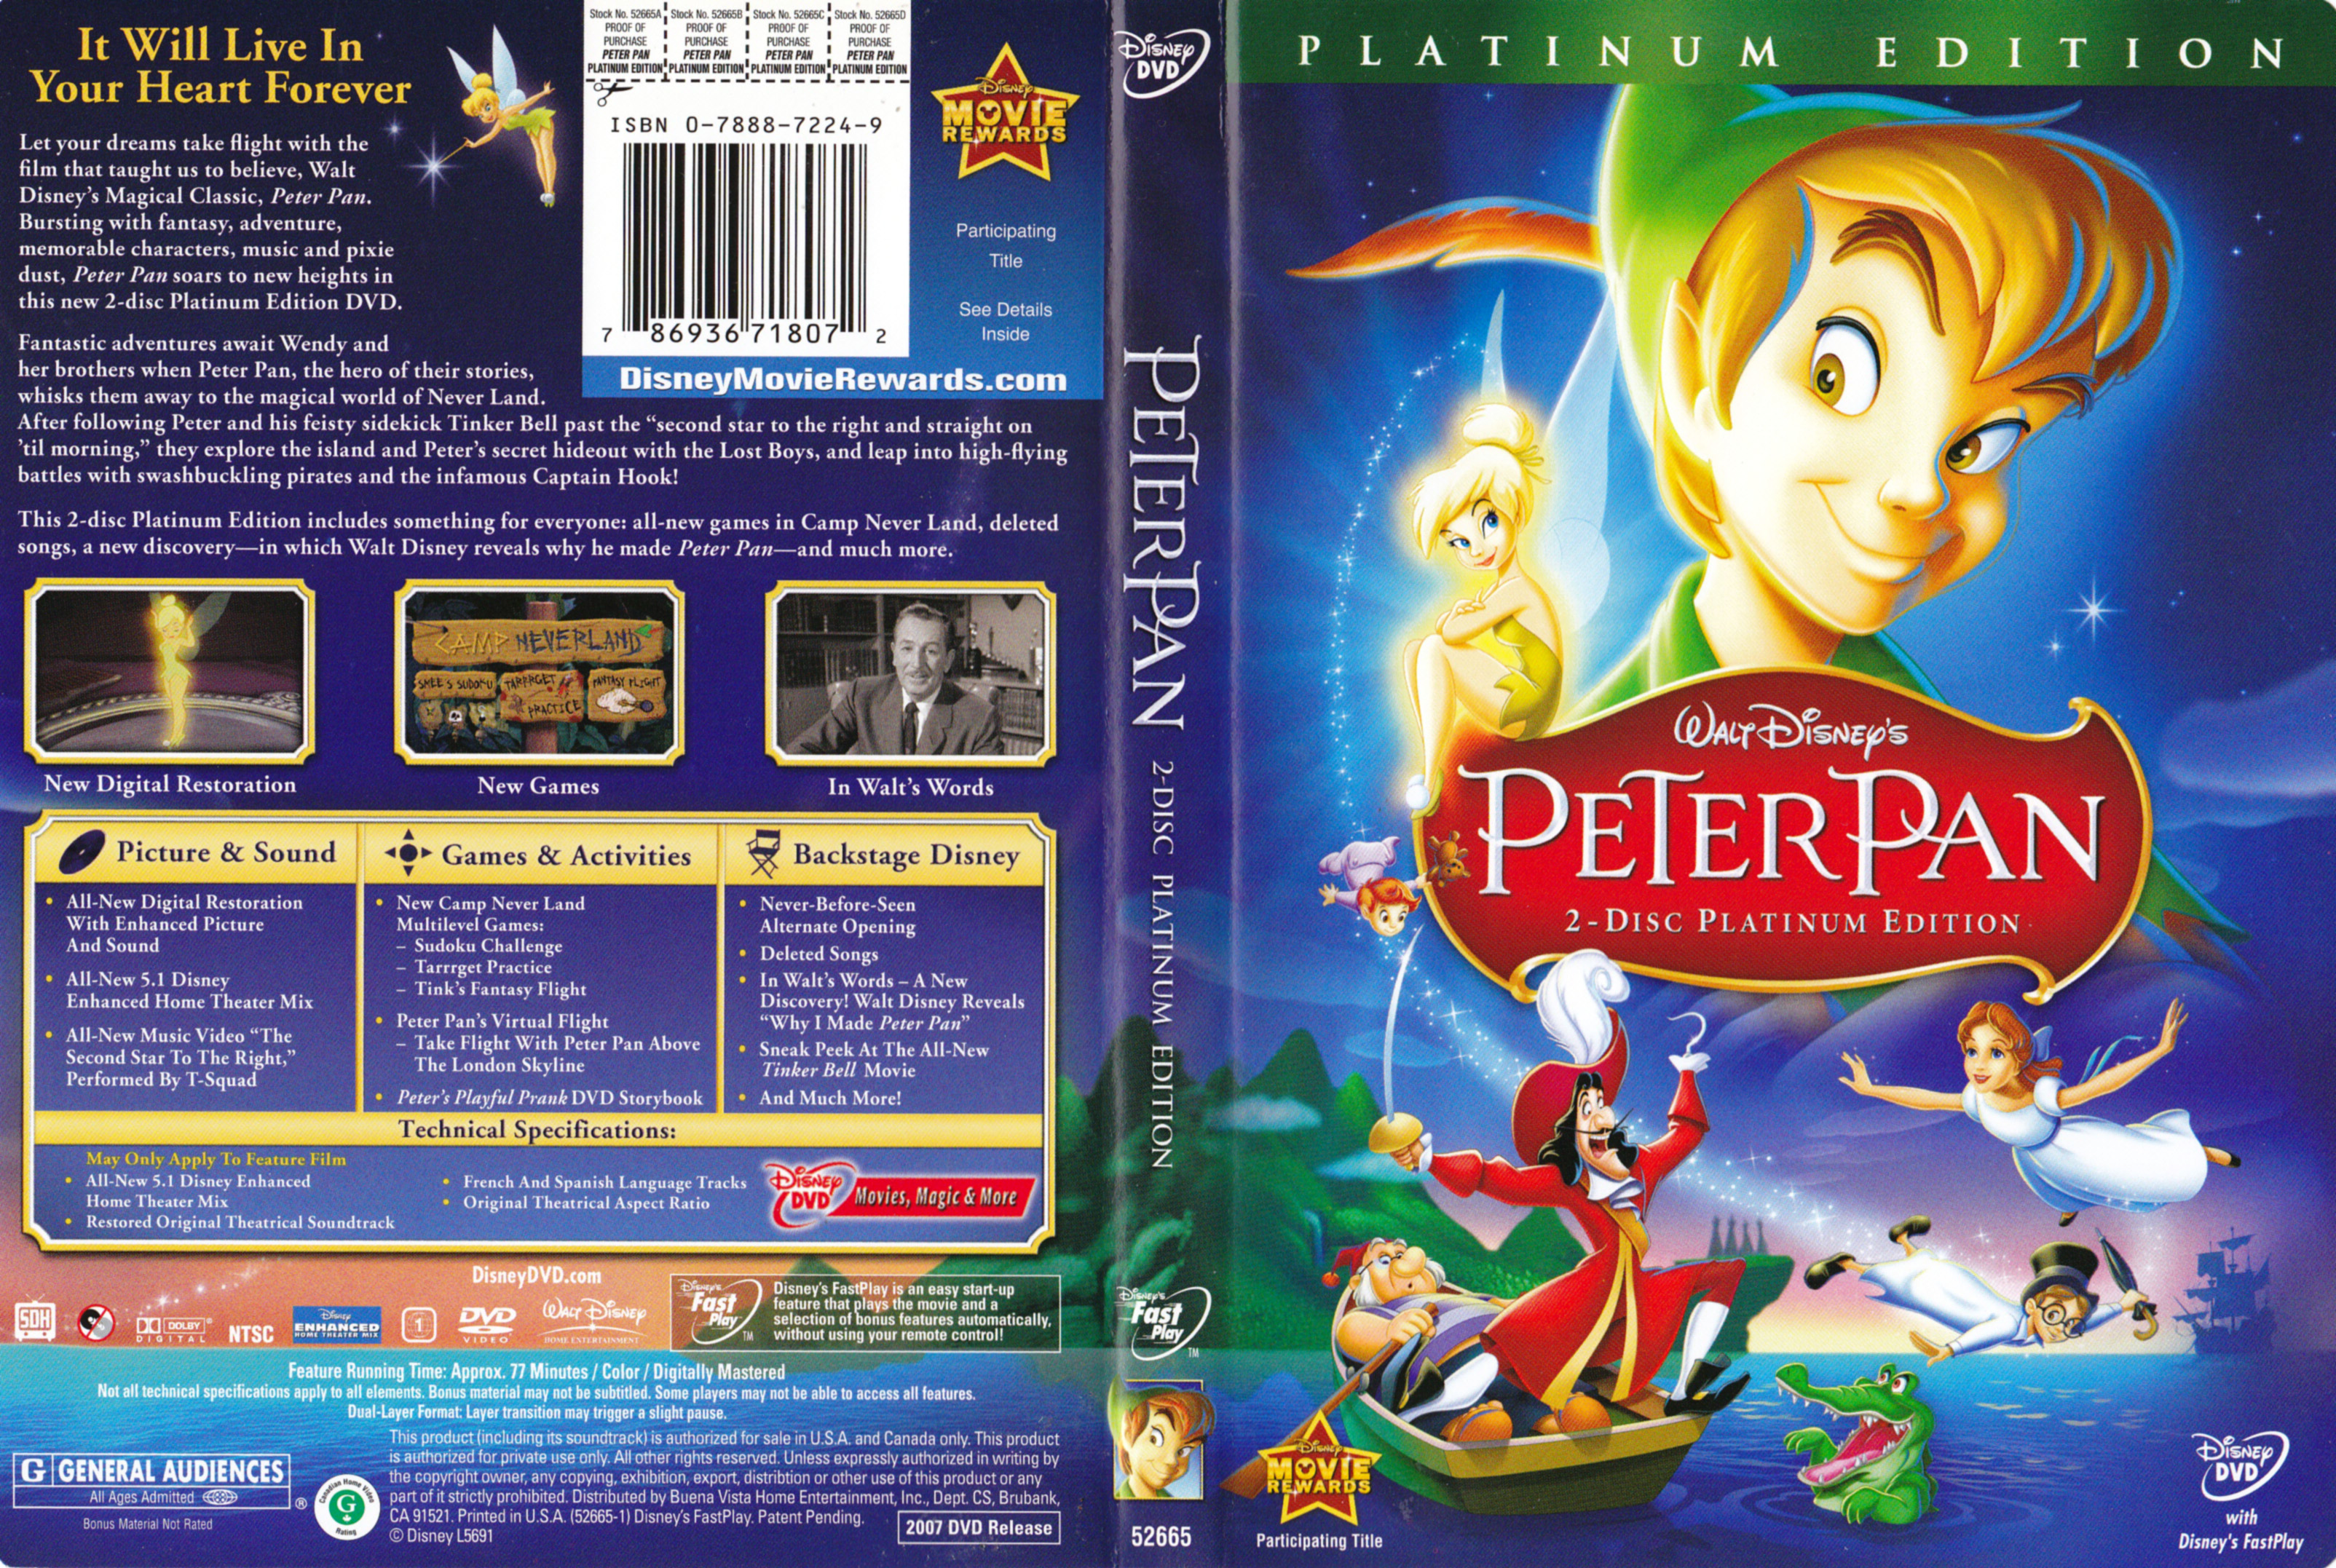 Jaquette DVD Peter pan (Canadienne)